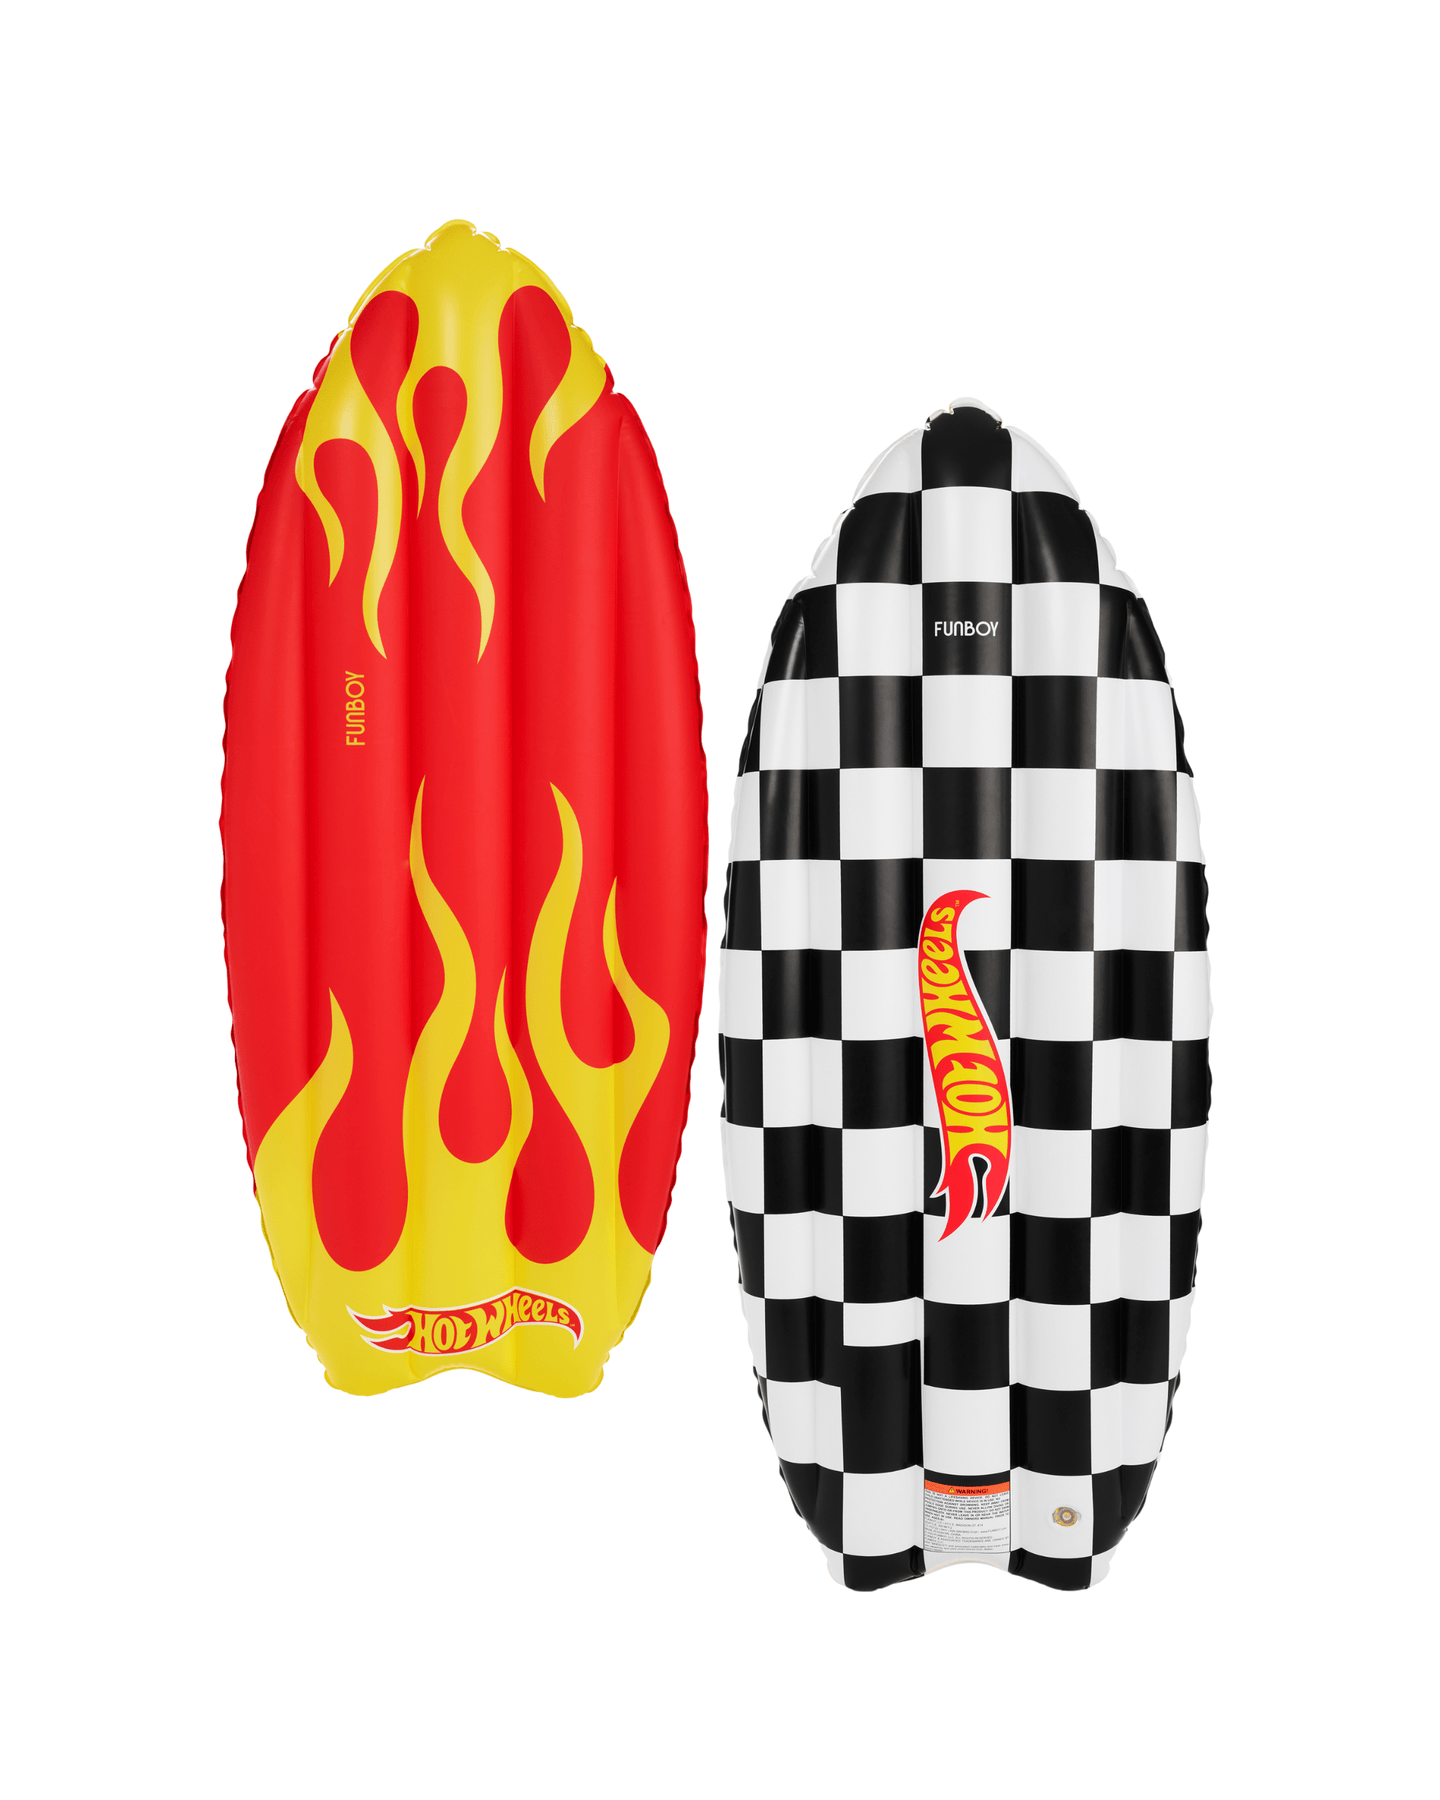 FUNBOY x Hot Wheels Checkered Flame Surfboard (Reversible) Pool Float